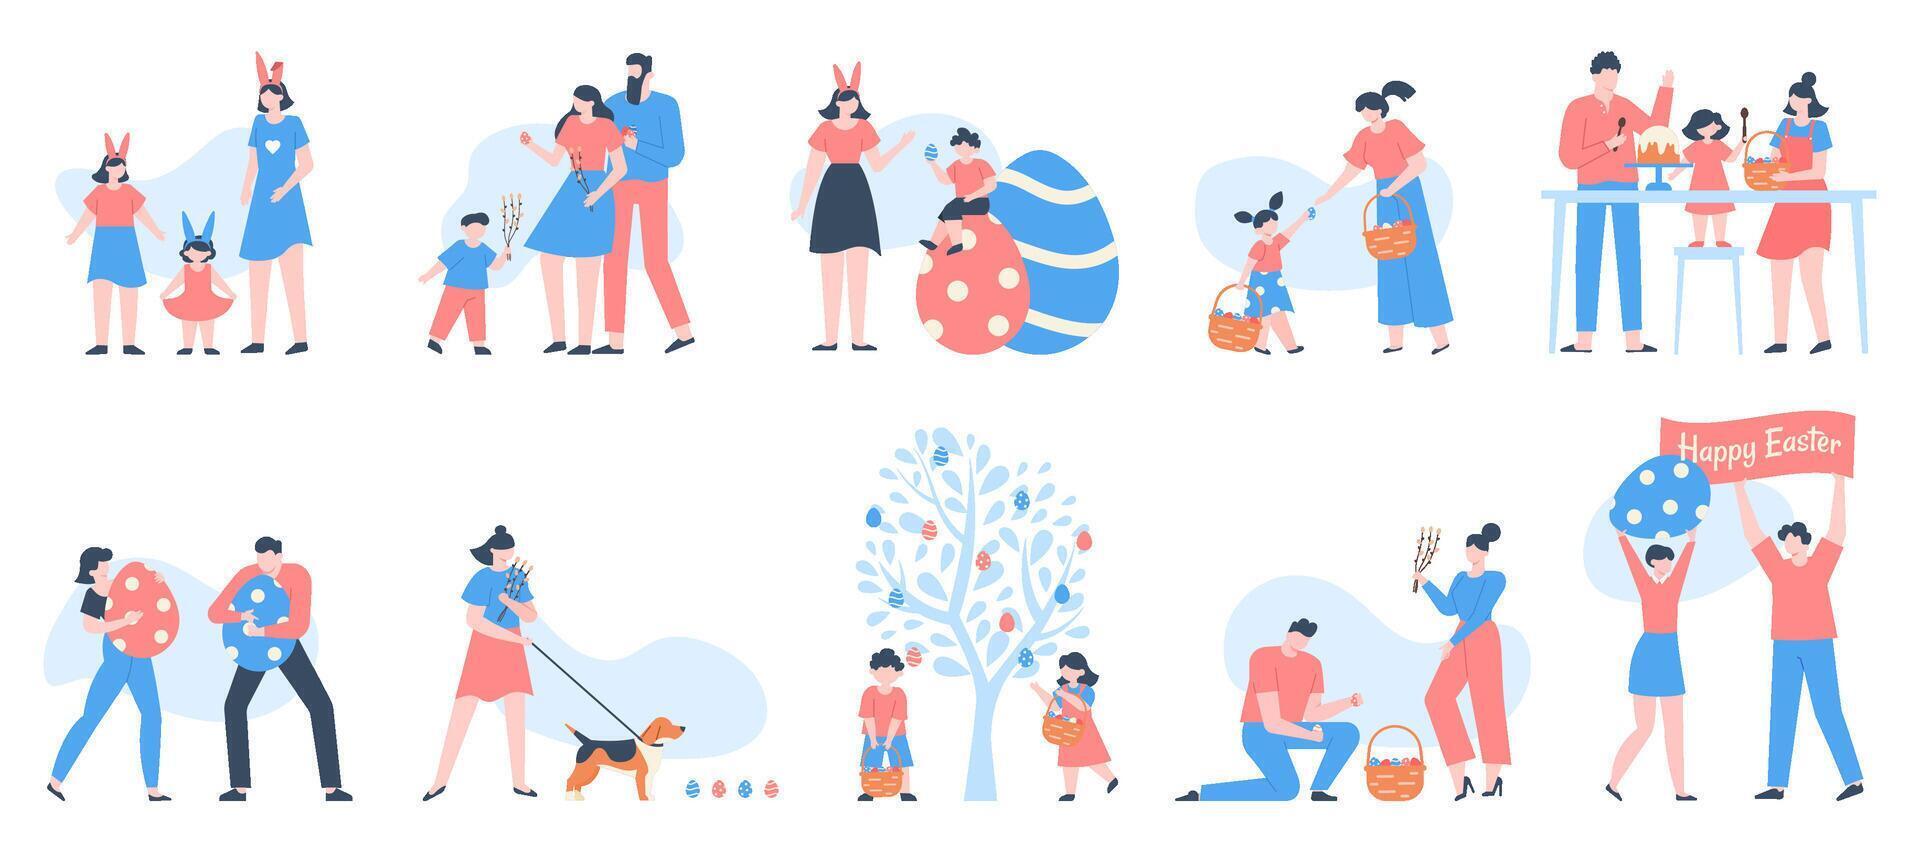 Easter characters. People carrying baskets of eggs, flowers and sweets, celebrating family with happy kids at egg hunting vector illustration set